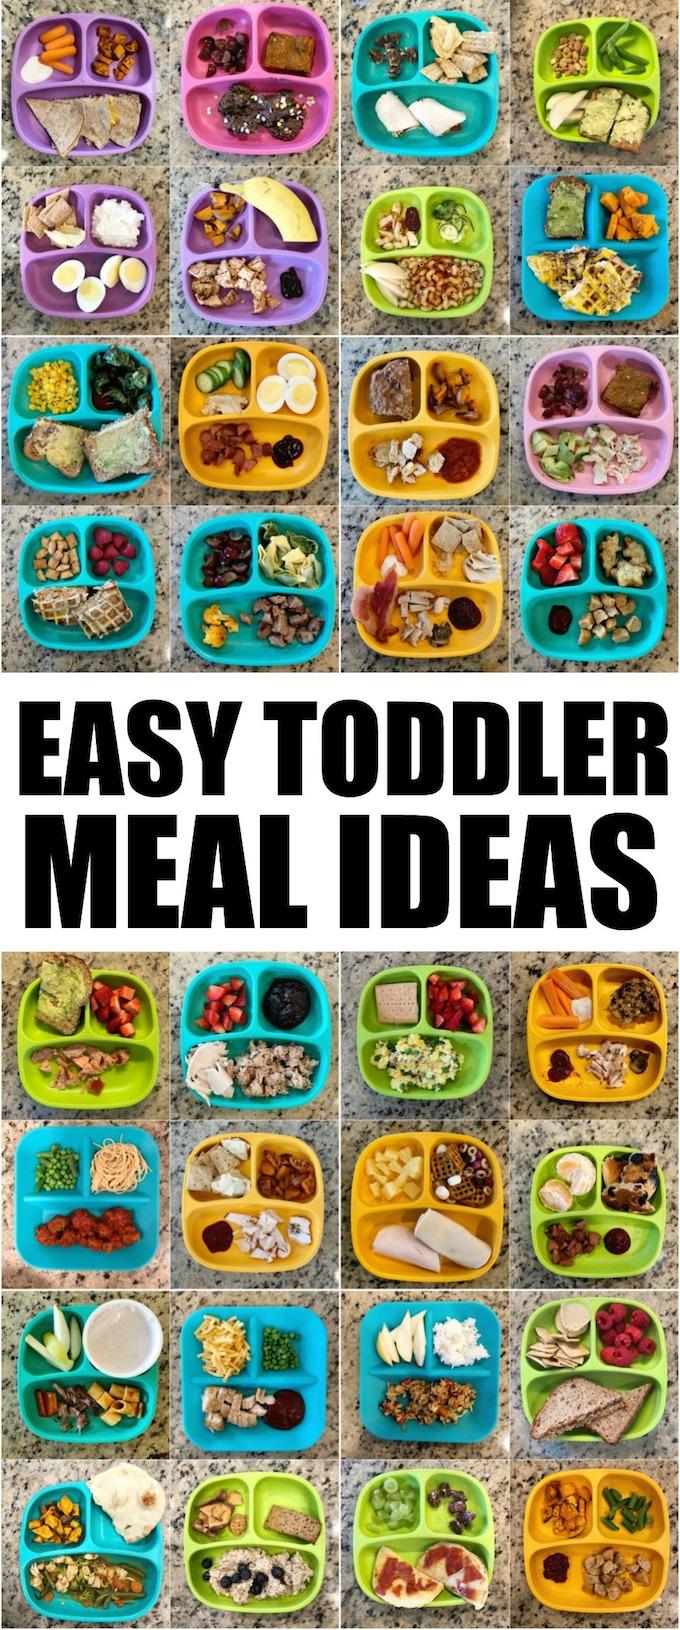 These Toddler Meal Ideas are simple, healthy and easy to assemble. Use these ideas to introduce your toddlers to new foods, help picky eaters and make meals more enjoyable for everyone.